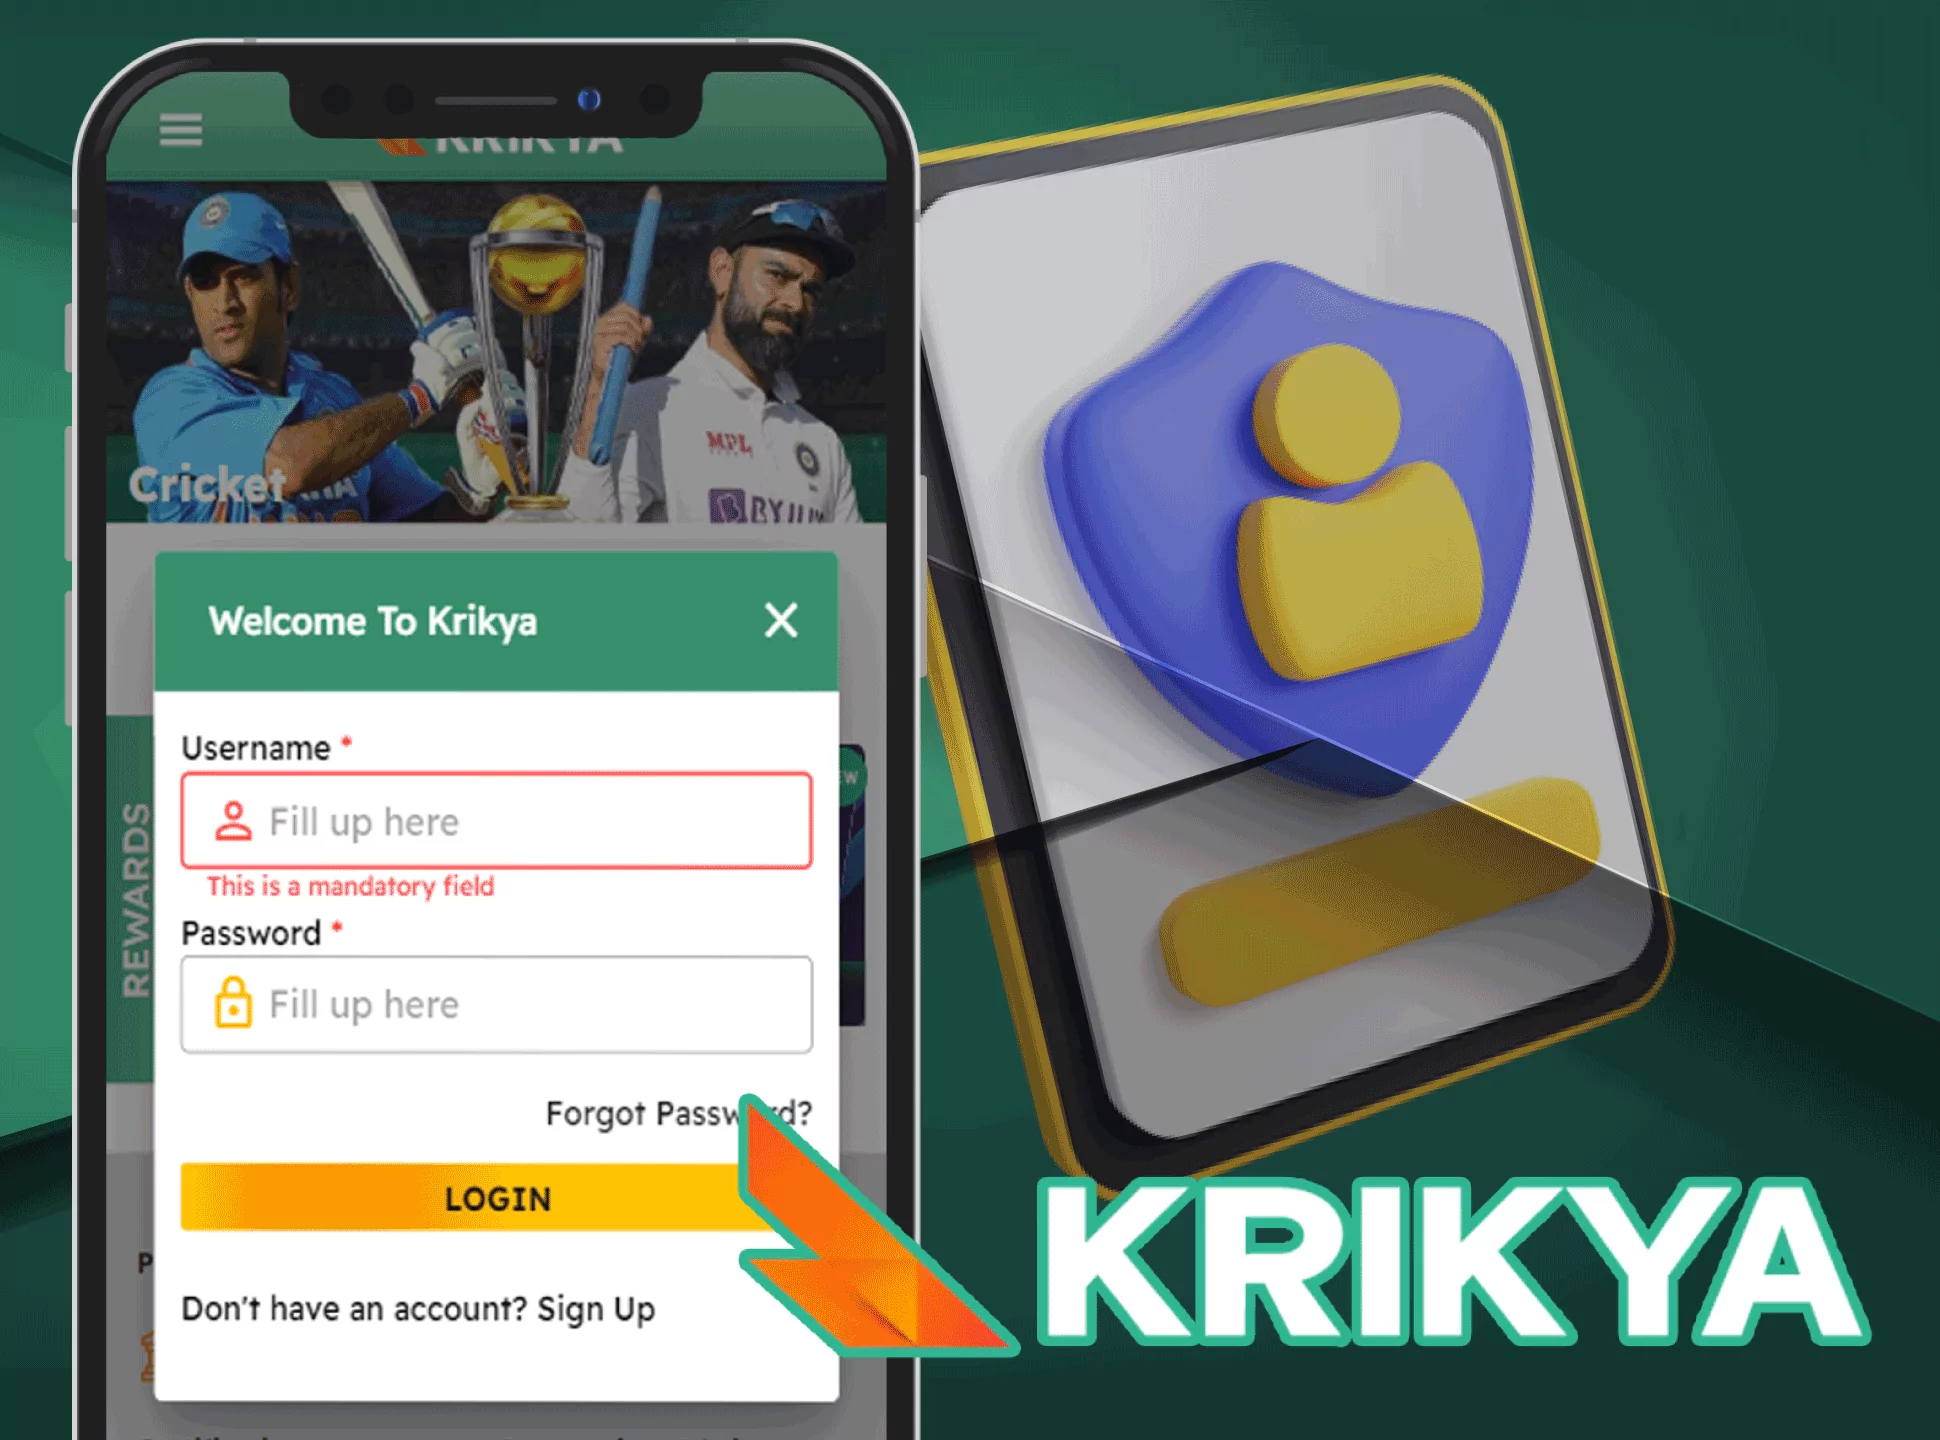 Log in for Krikya with your username and password.